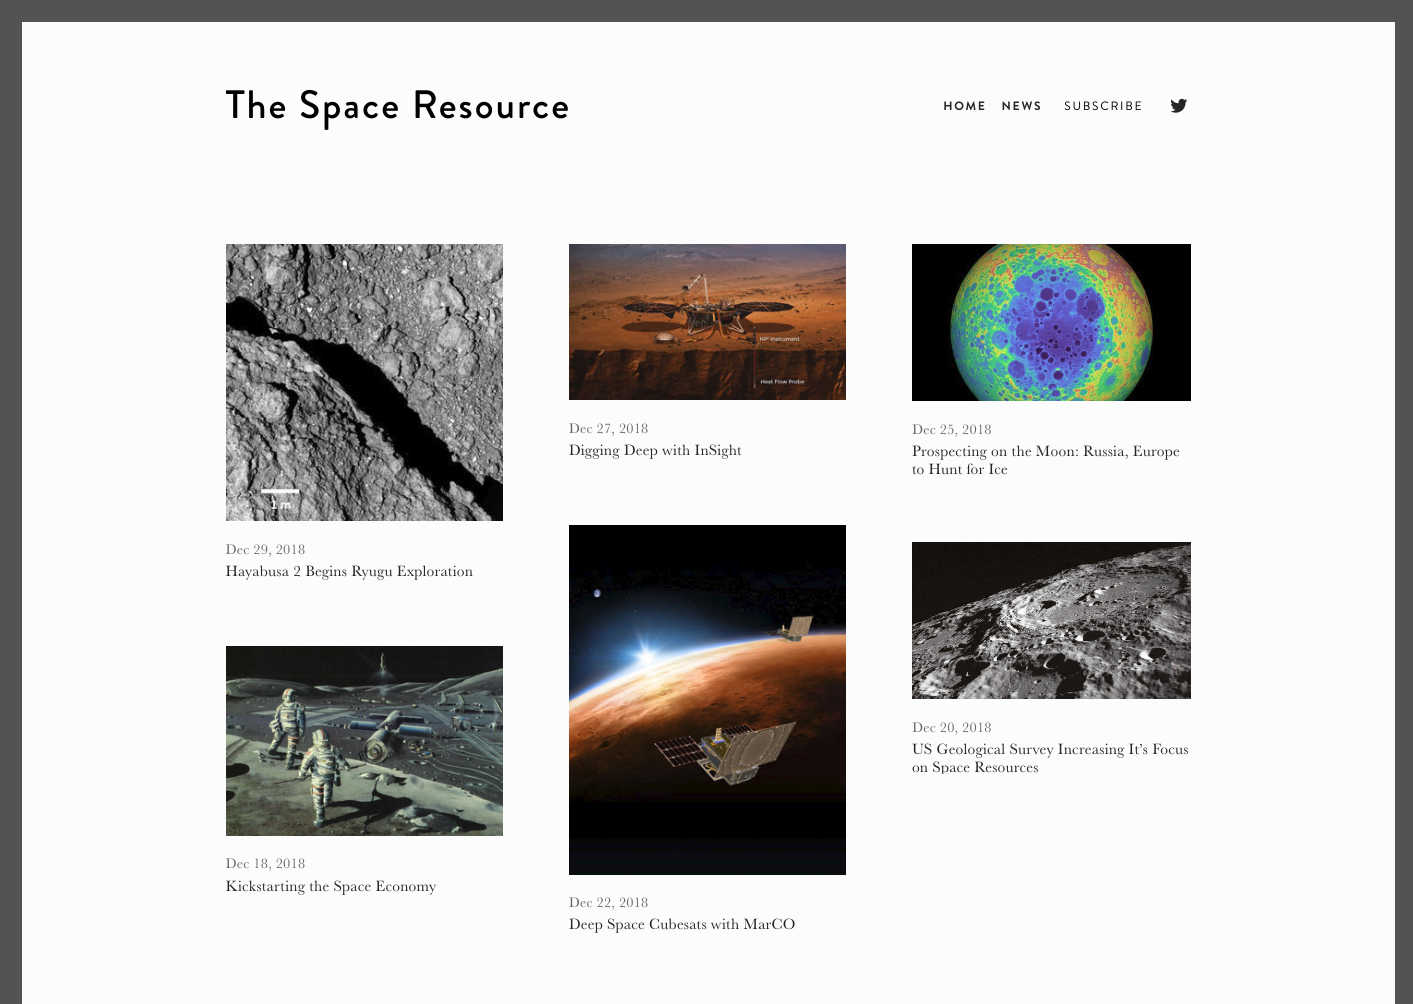 The Space Resource news site for ISRU news, analysis, and discussion